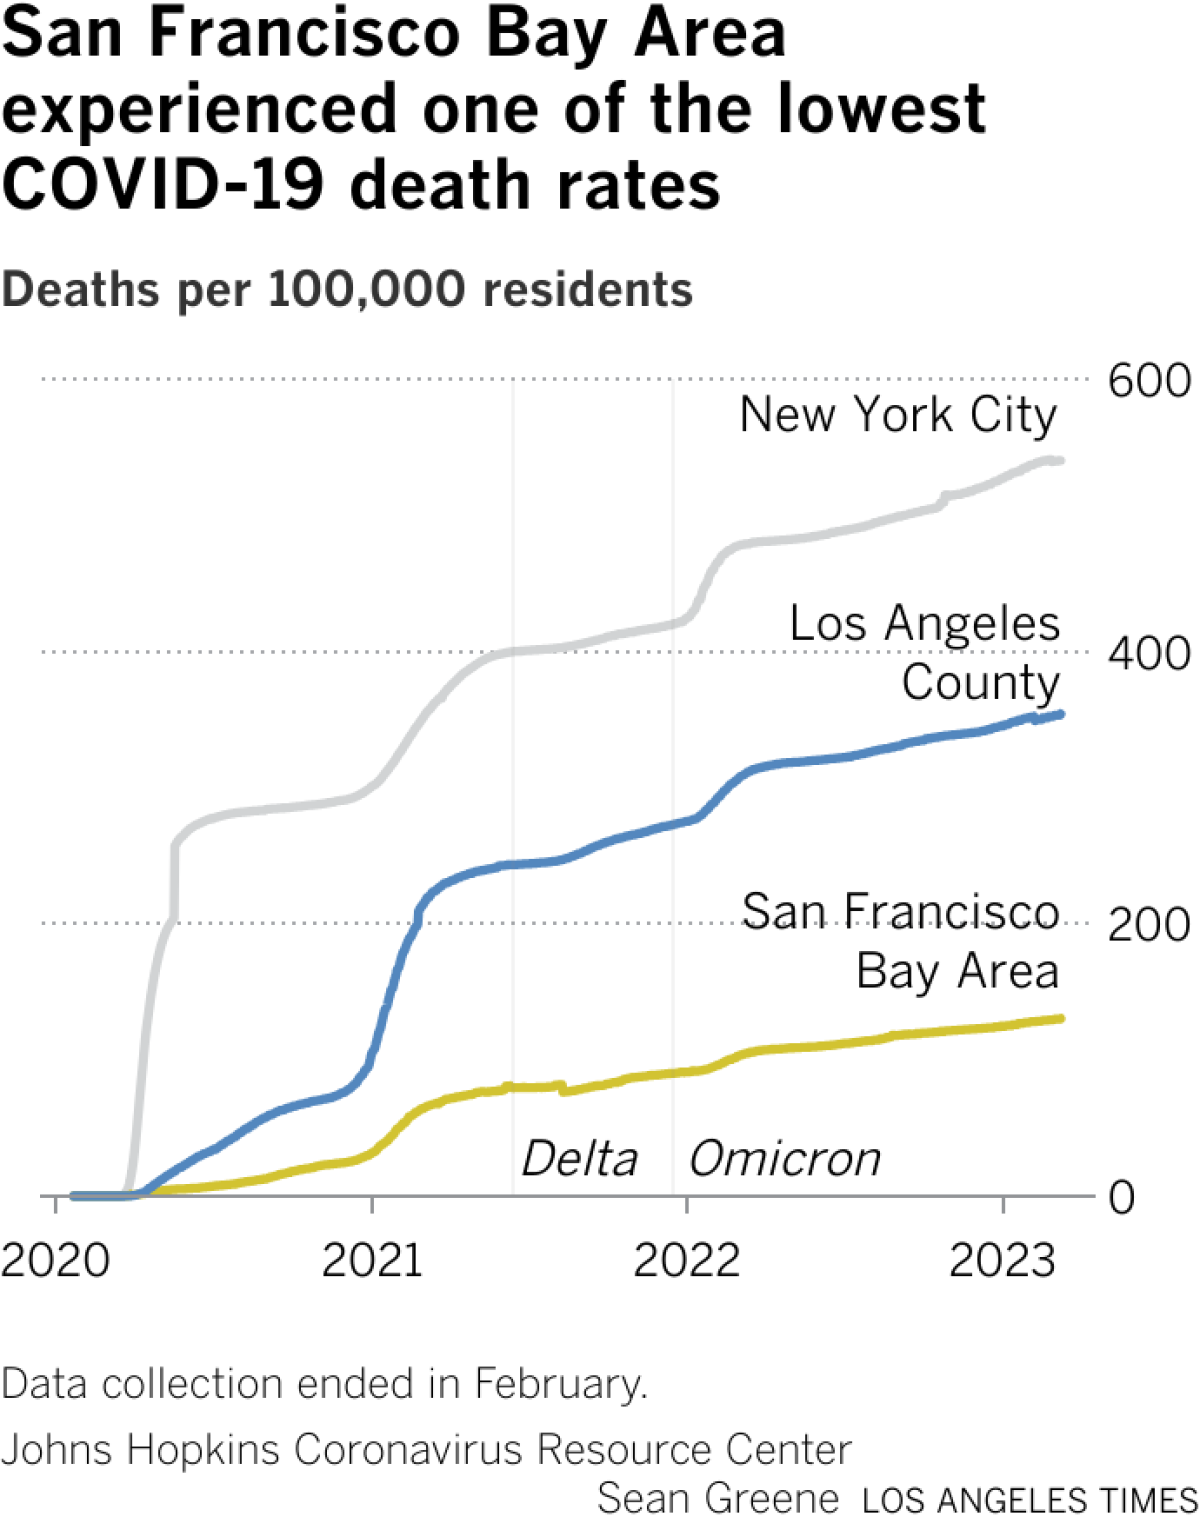 Line chart comparing COVID-19 death rates in San Francisco Bay Area, Los Angeles County and New York City. The Bay Area rate is significantly lower.